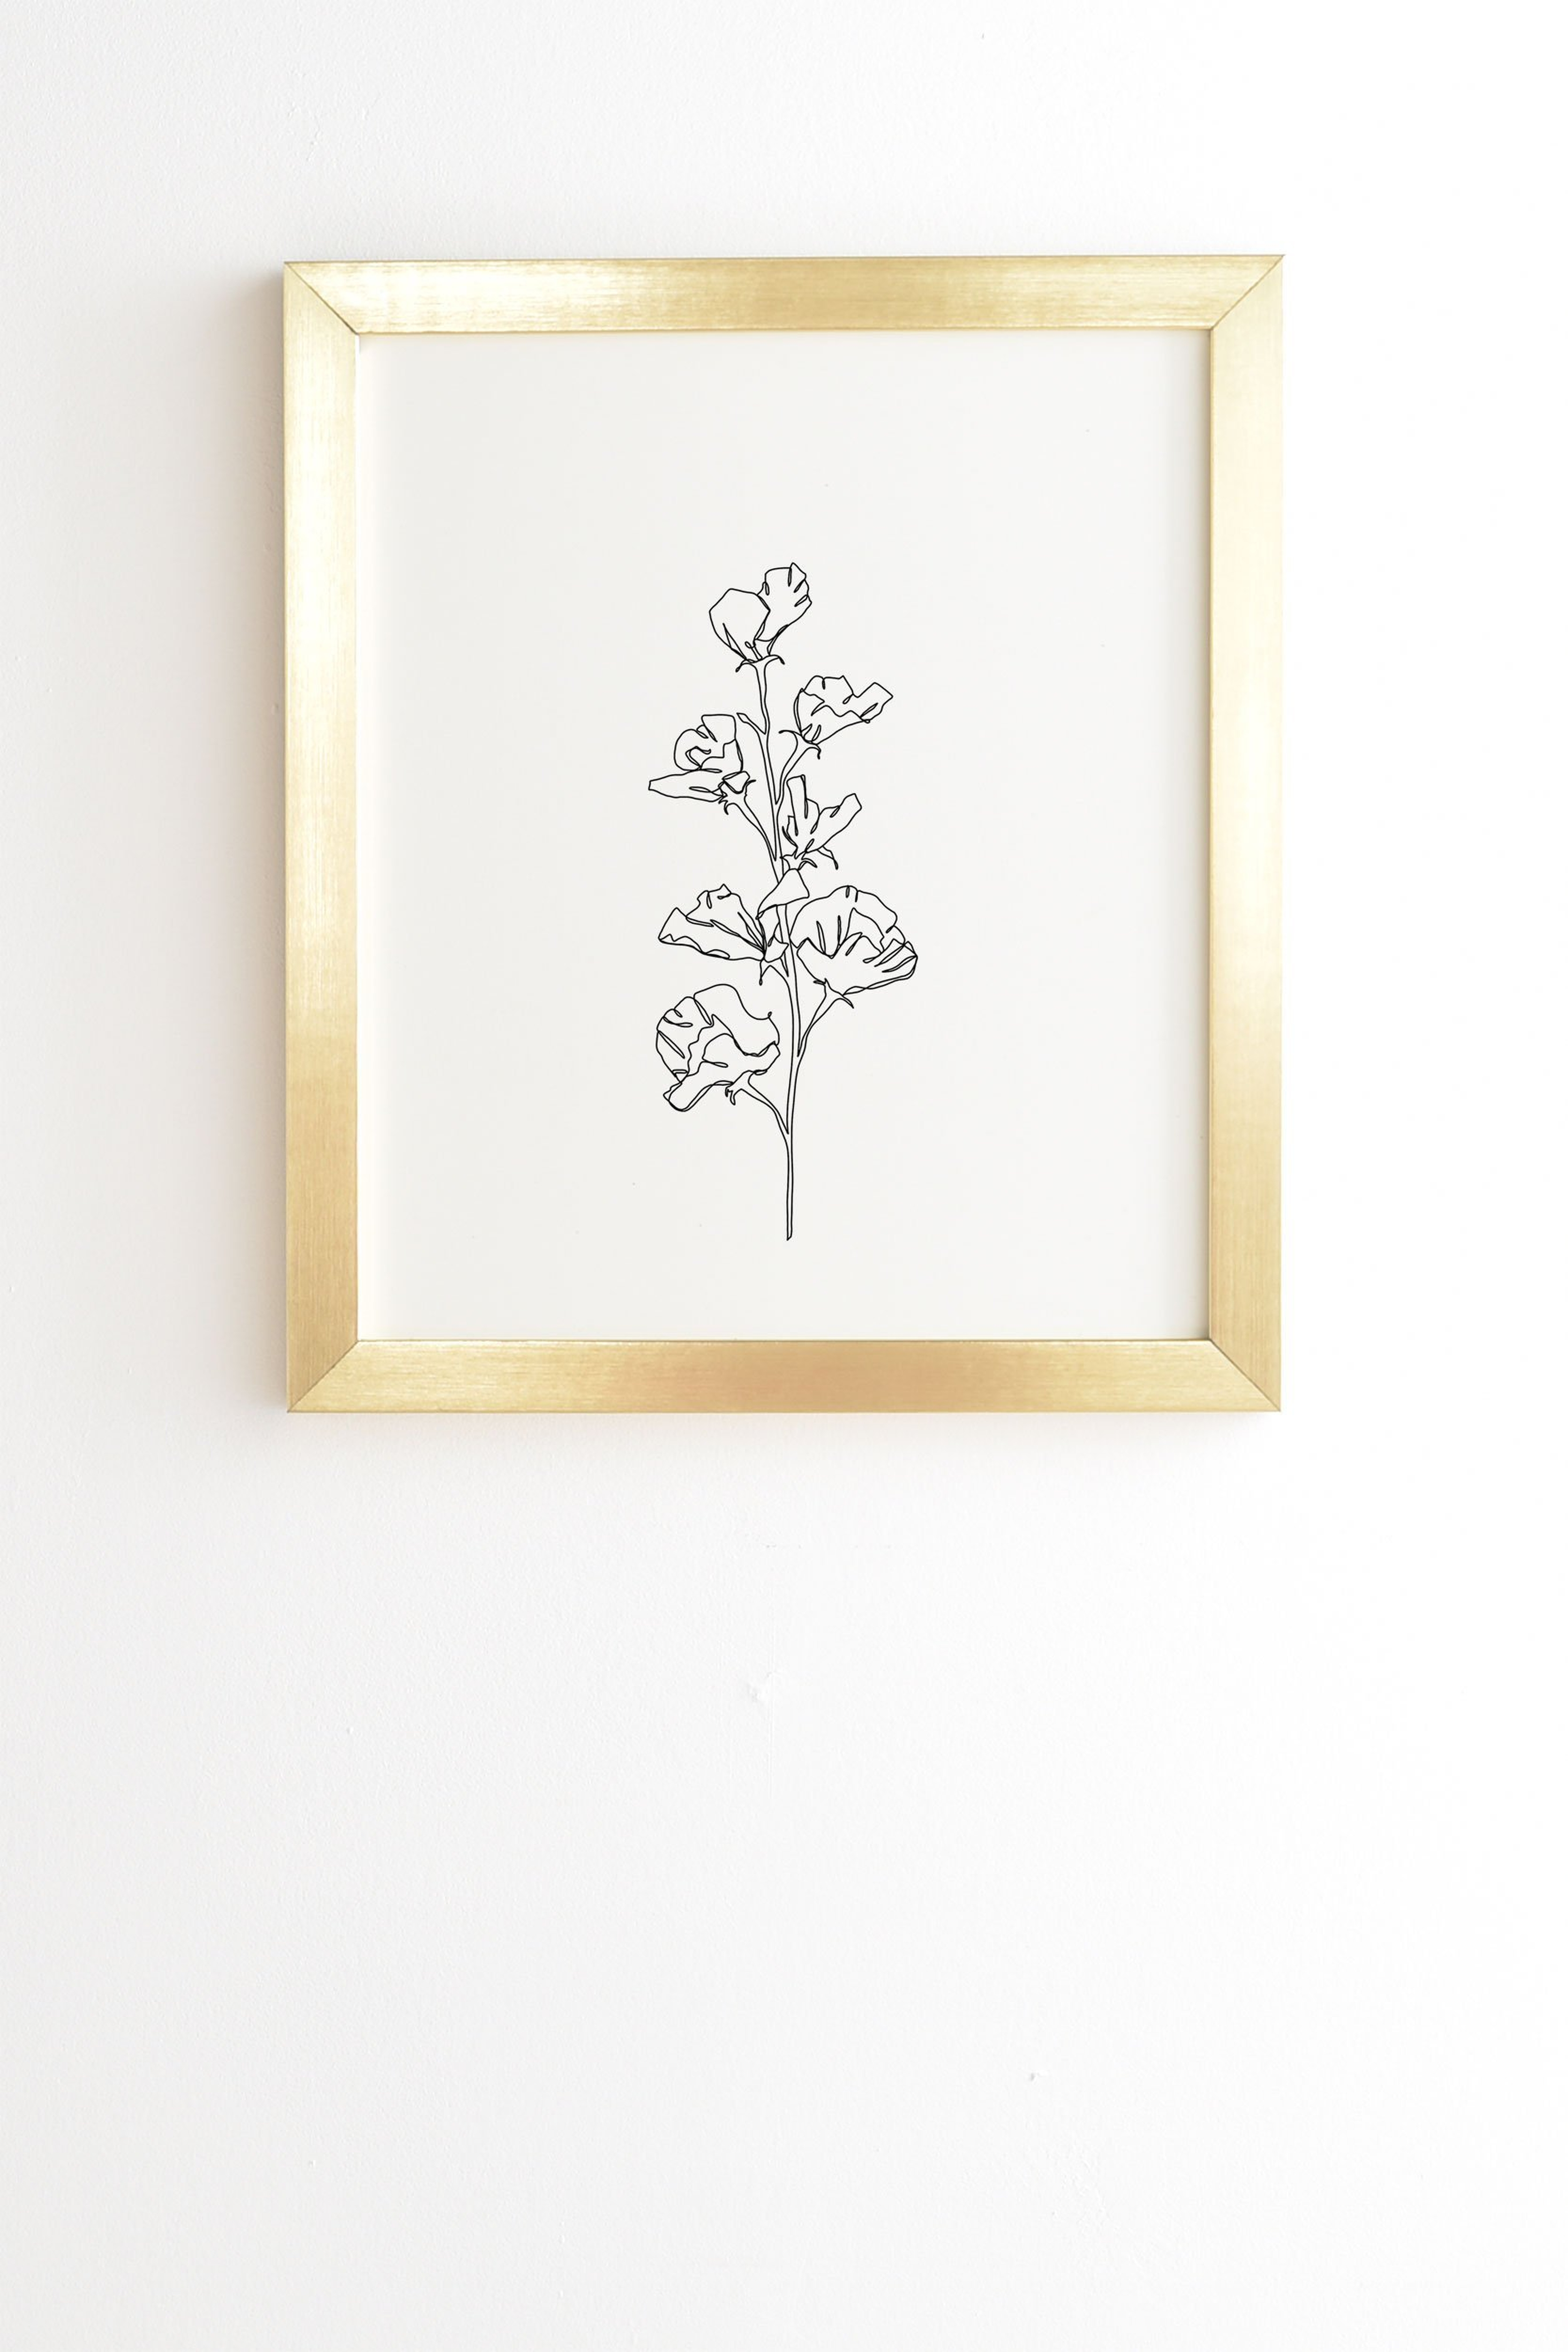 GOLD FRAMED WALL ART COTTON FLOWER ILLUSTRATION  BY THE COLOUR STUDY - Wander Print Co.